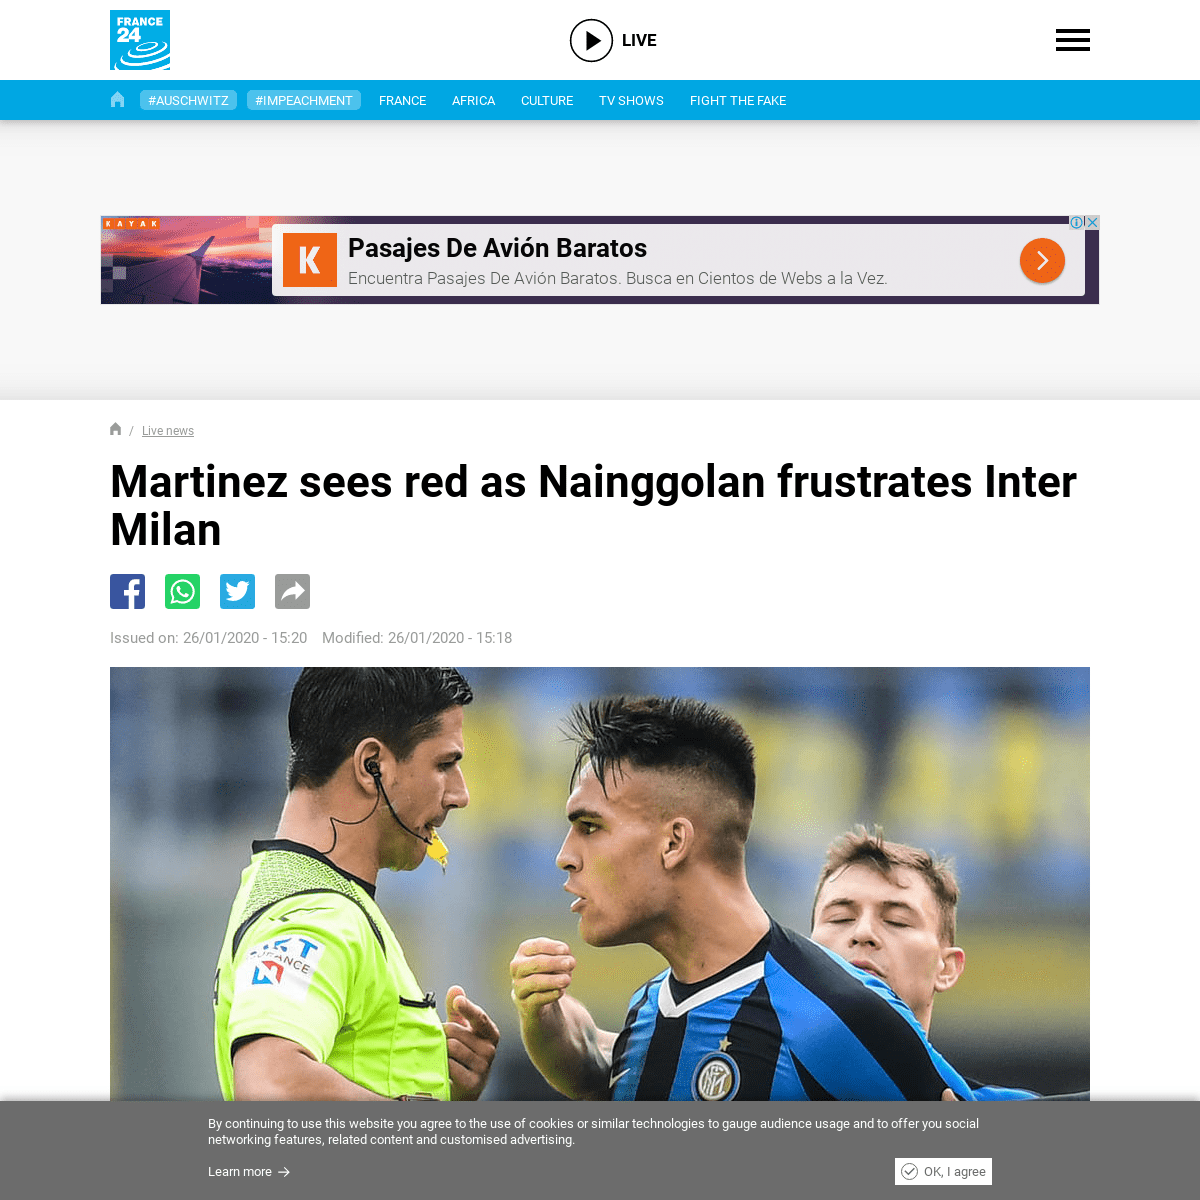 A complete backup of www.france24.com/en/20200126-martinez-sees-red-as-nainggolan-frustrates-inter-milan